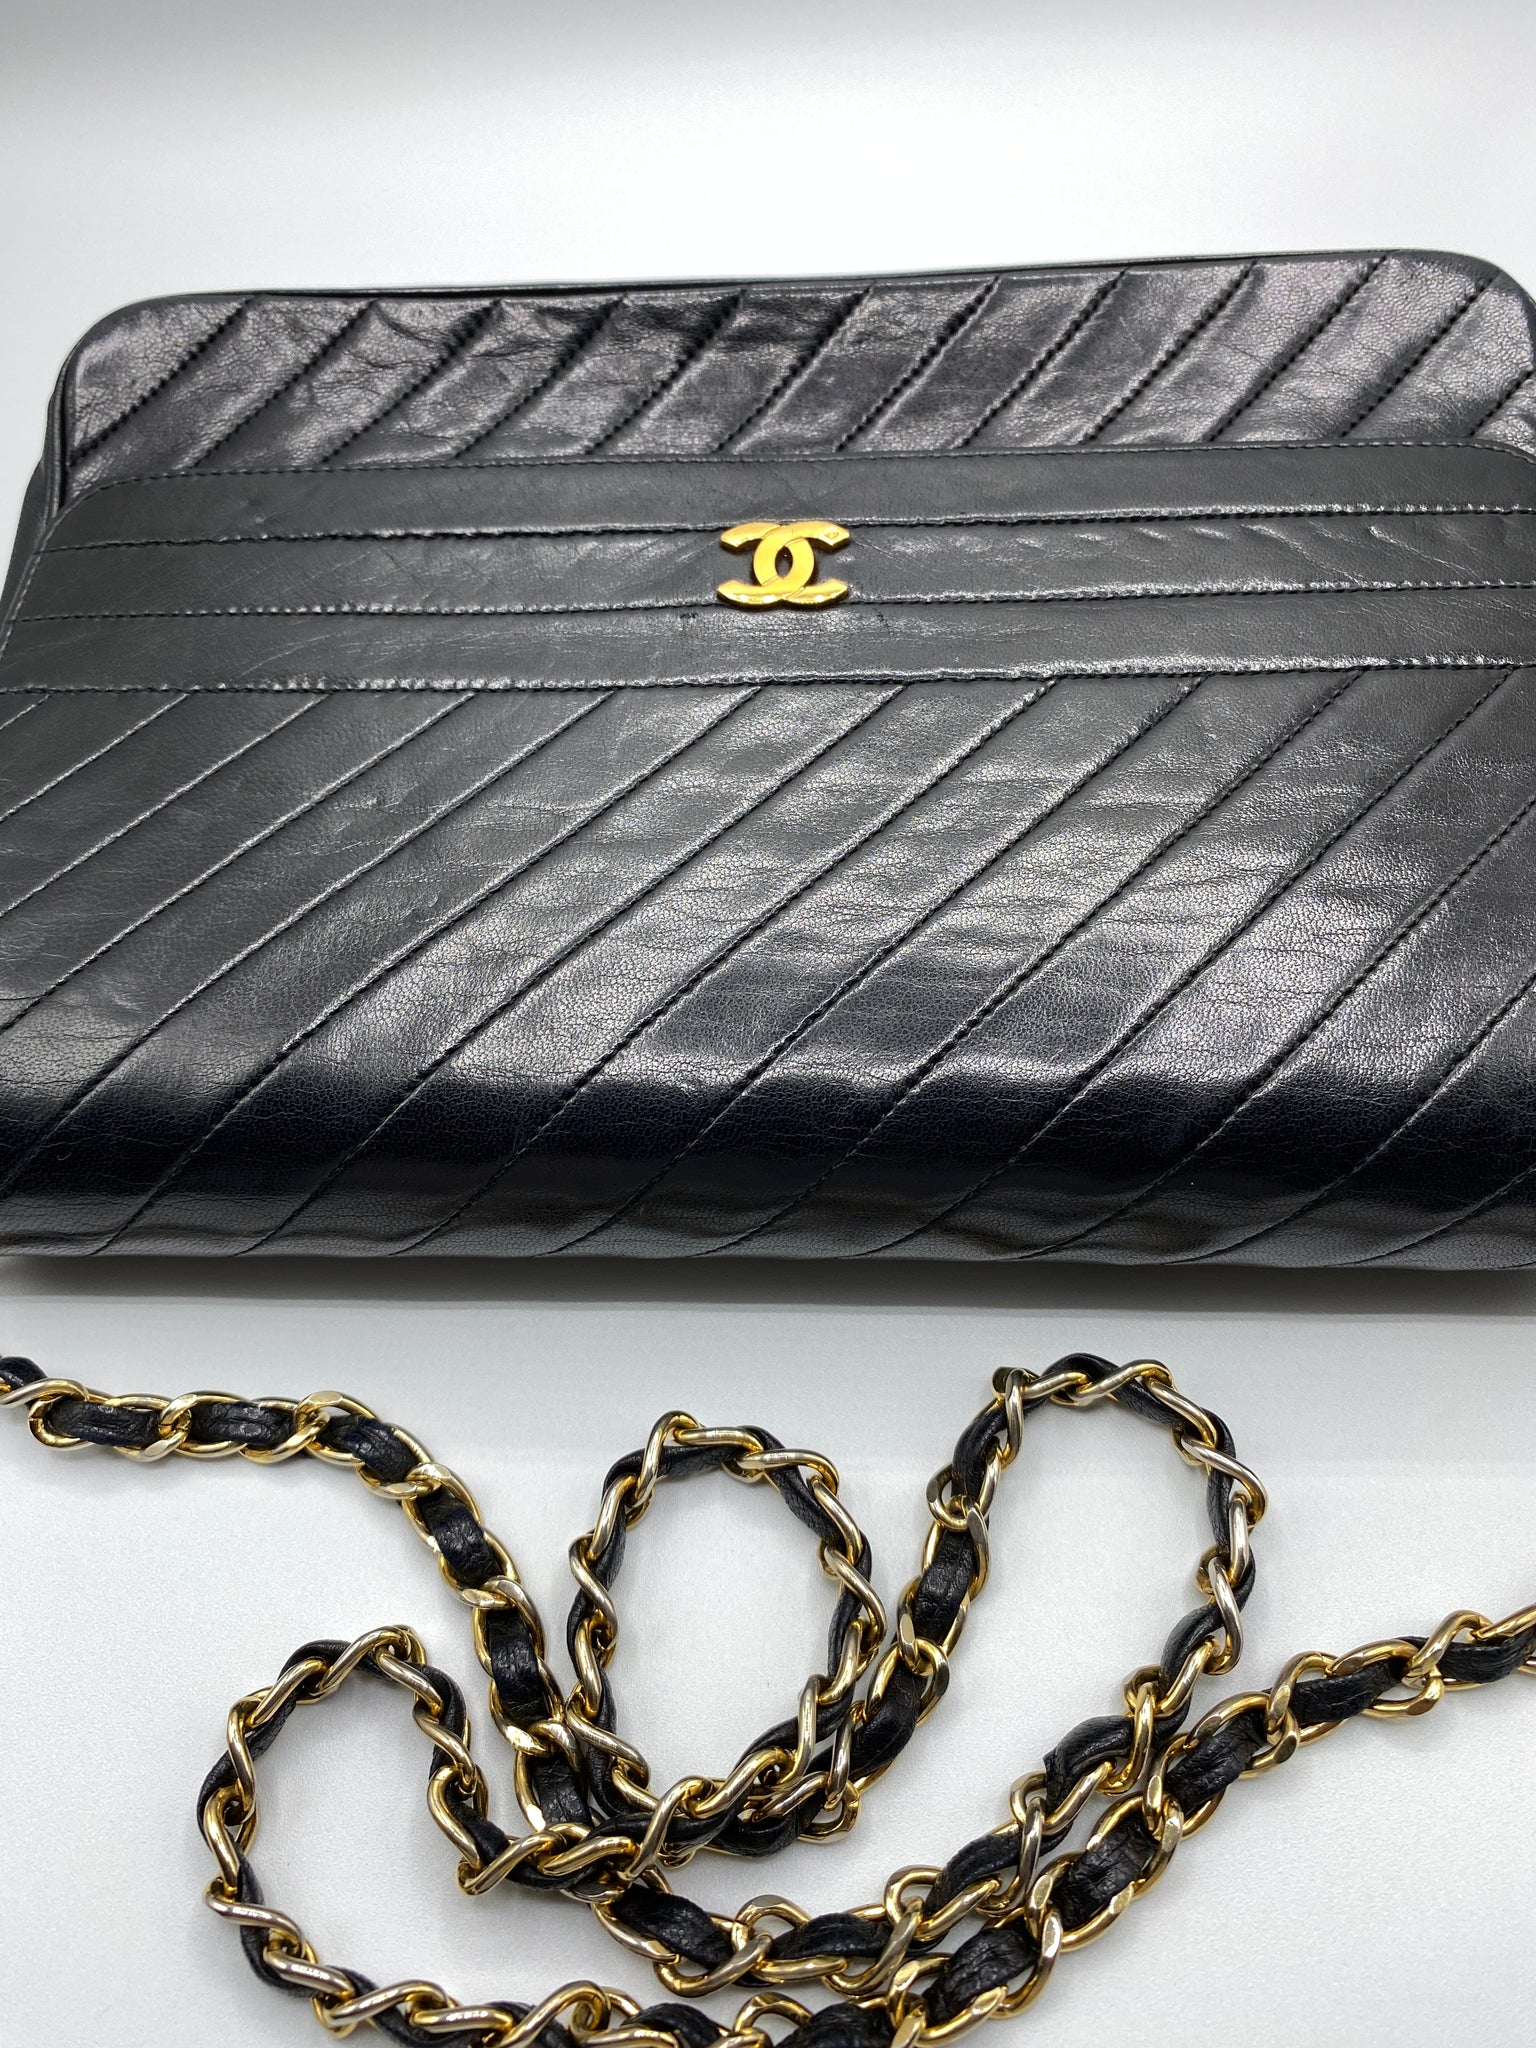 Chanel Small Classic Flap Bag Black Quilted Caviar